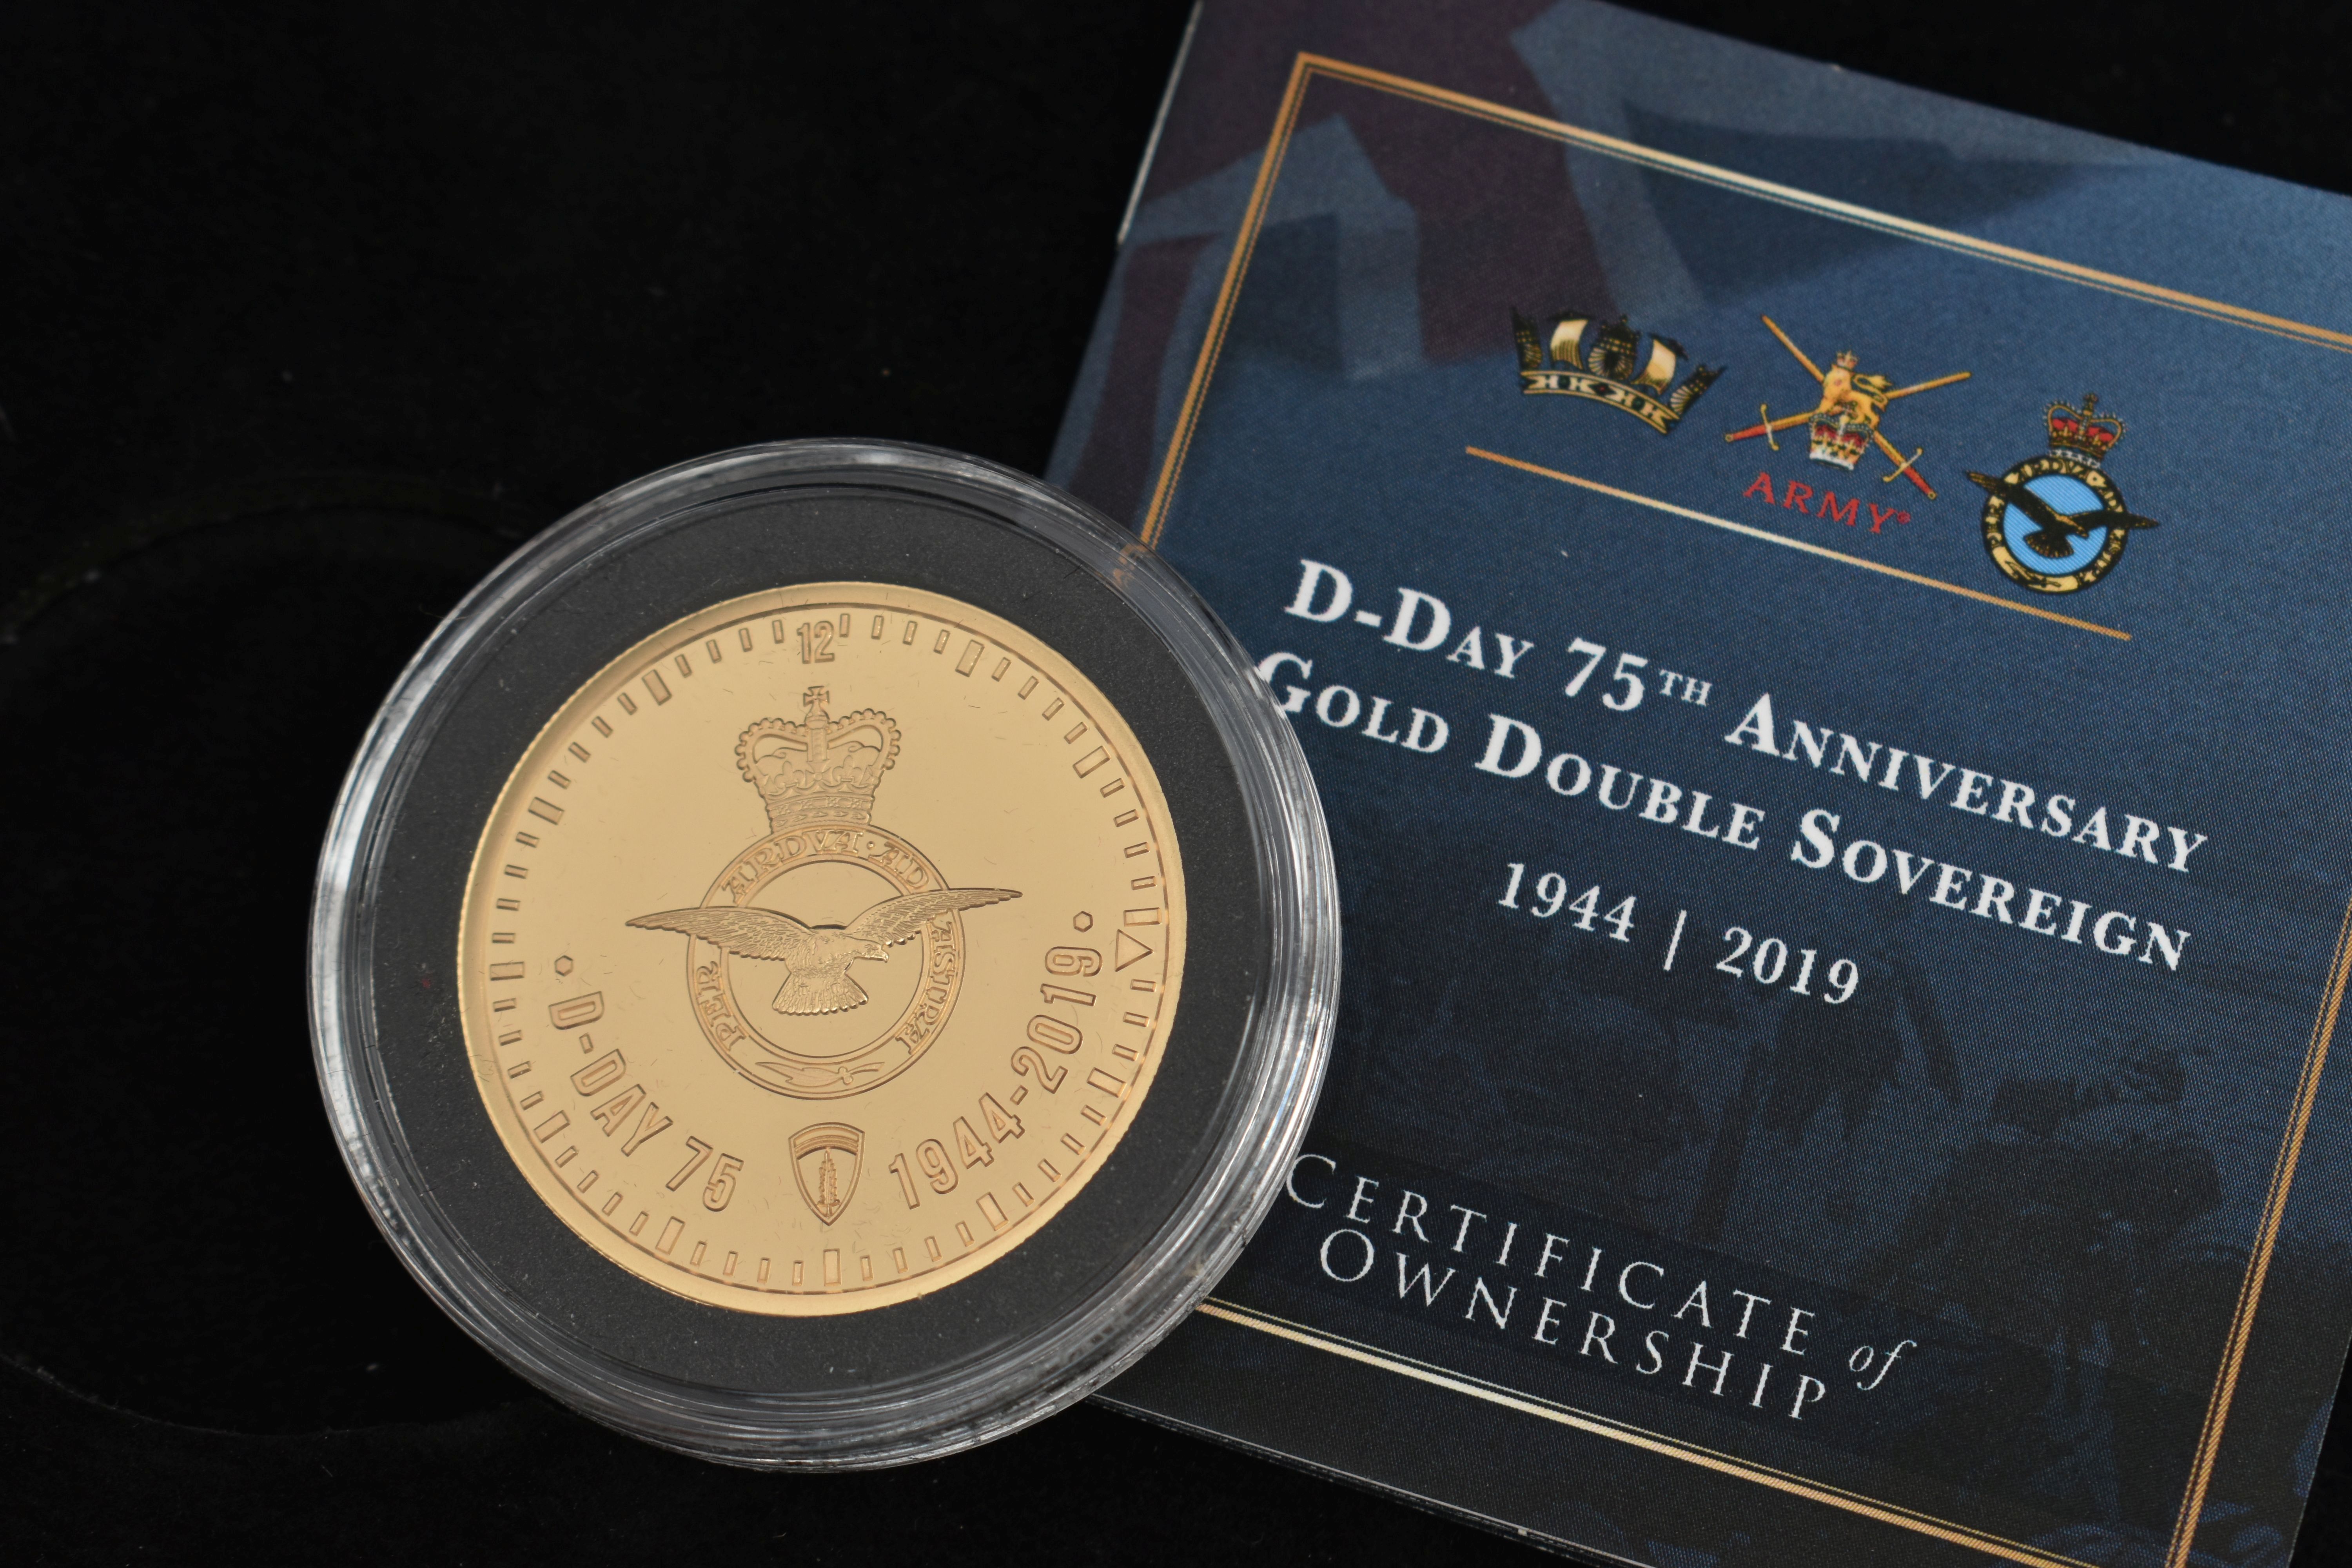 A D-DAY ANNIVERSARY GOLD DOUBLE SOVEREIGN 1944-2019, in case of issue 22ct Gold, 32mm diameter, 16 - Bild 2 aus 3